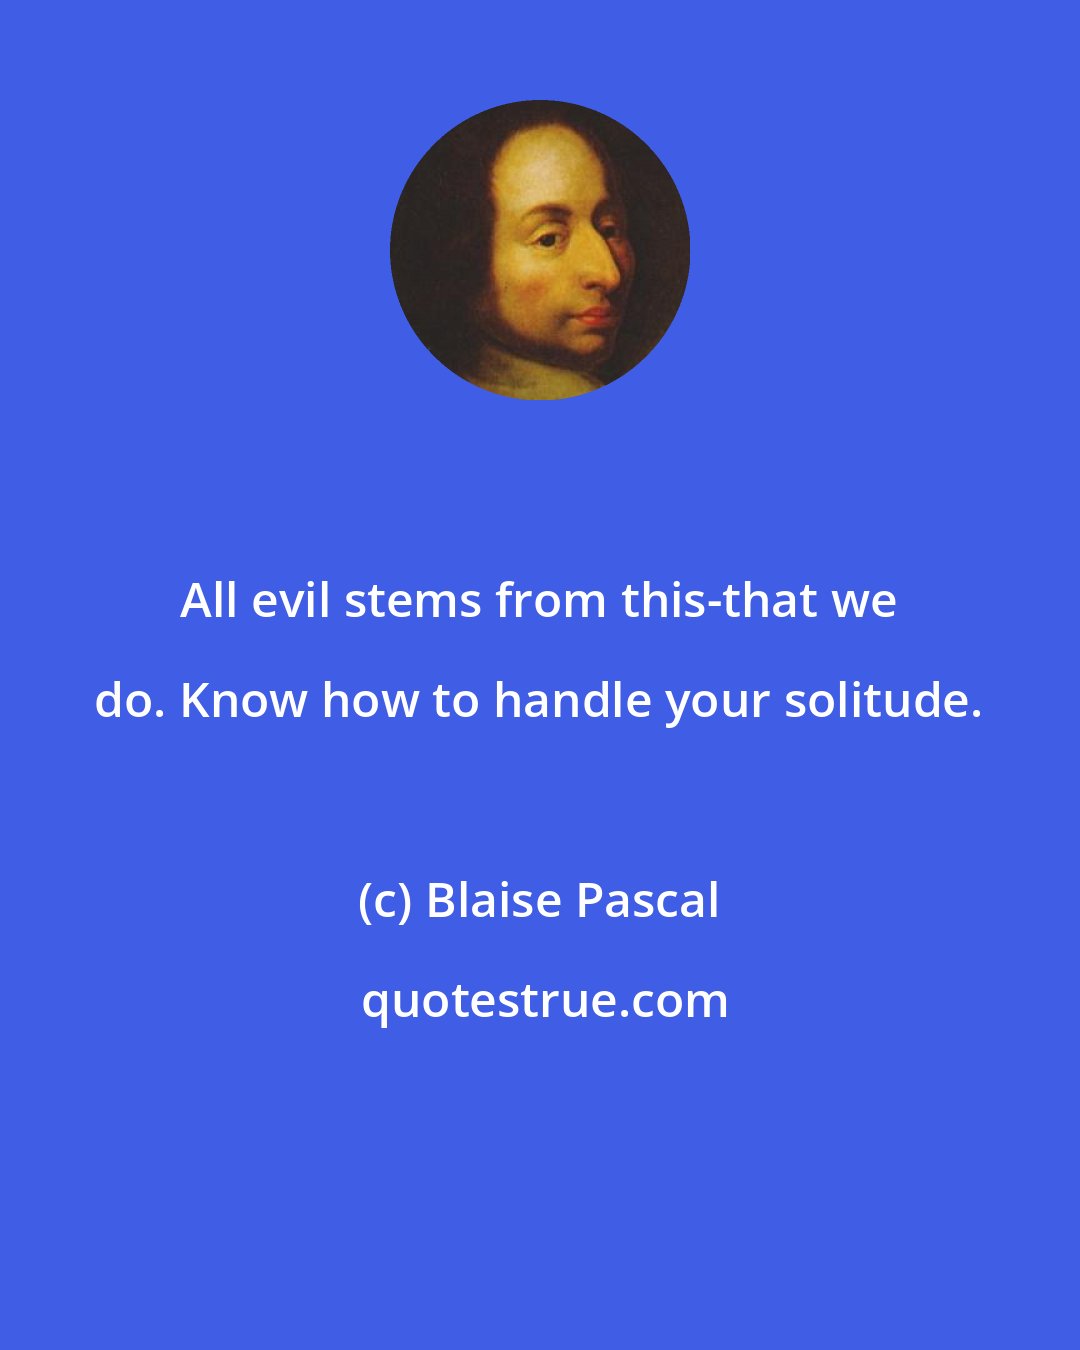 Blaise Pascal: All evil stems from this-that we do. Know how to handle your solitude.